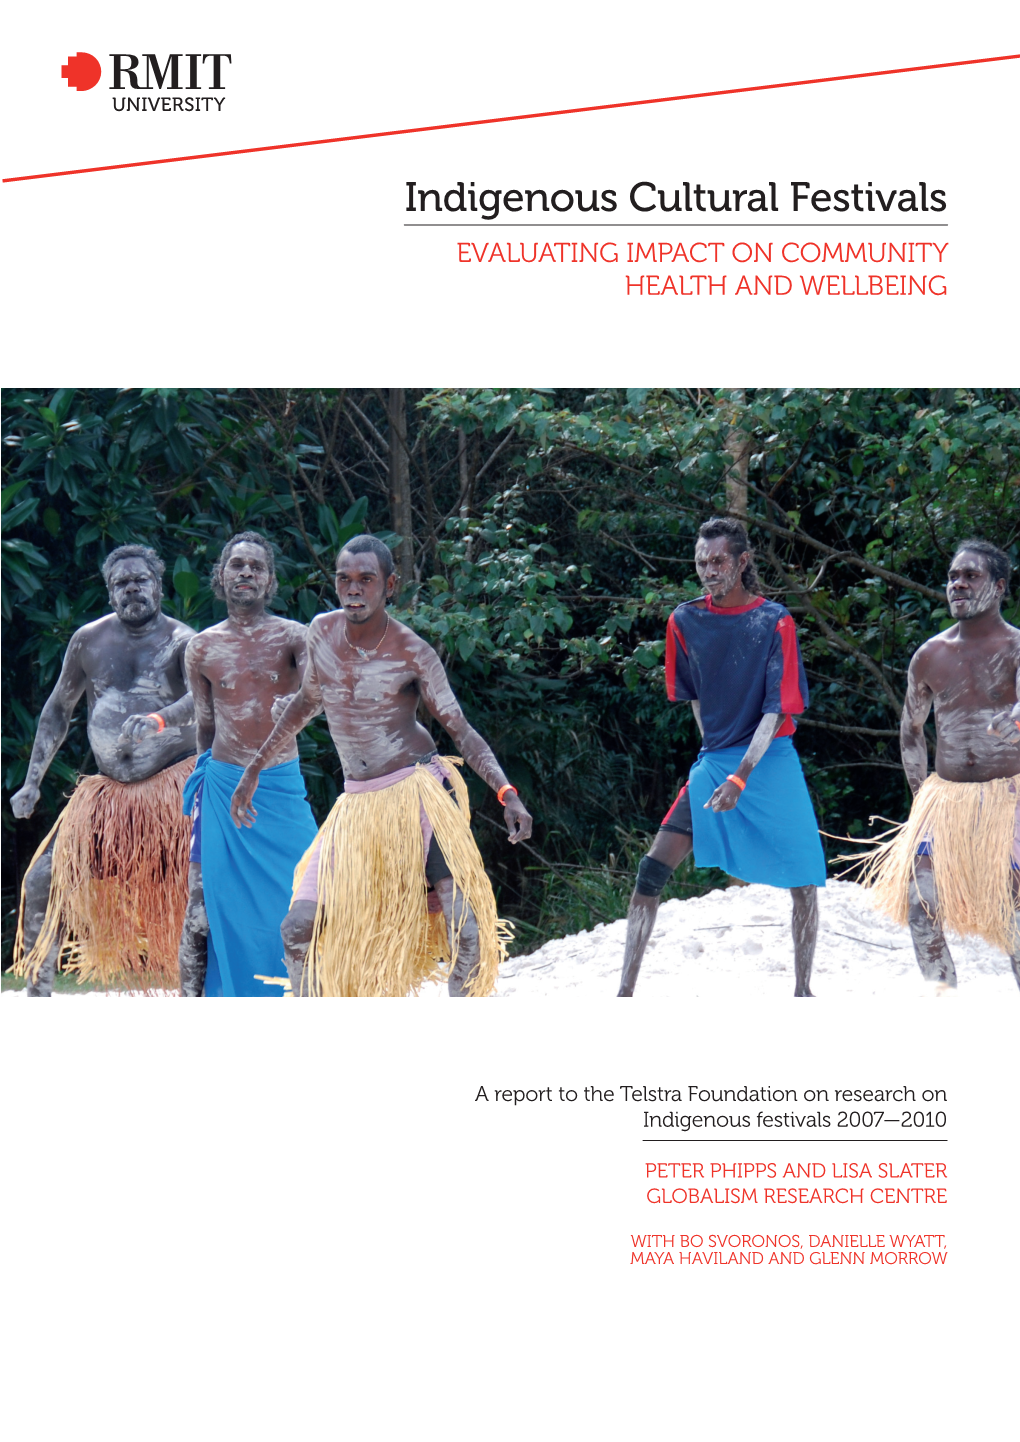 Indigenous Cultural Festivals EVALUATING IMPACT on COMMUNITY HEALTH and WELLBEING